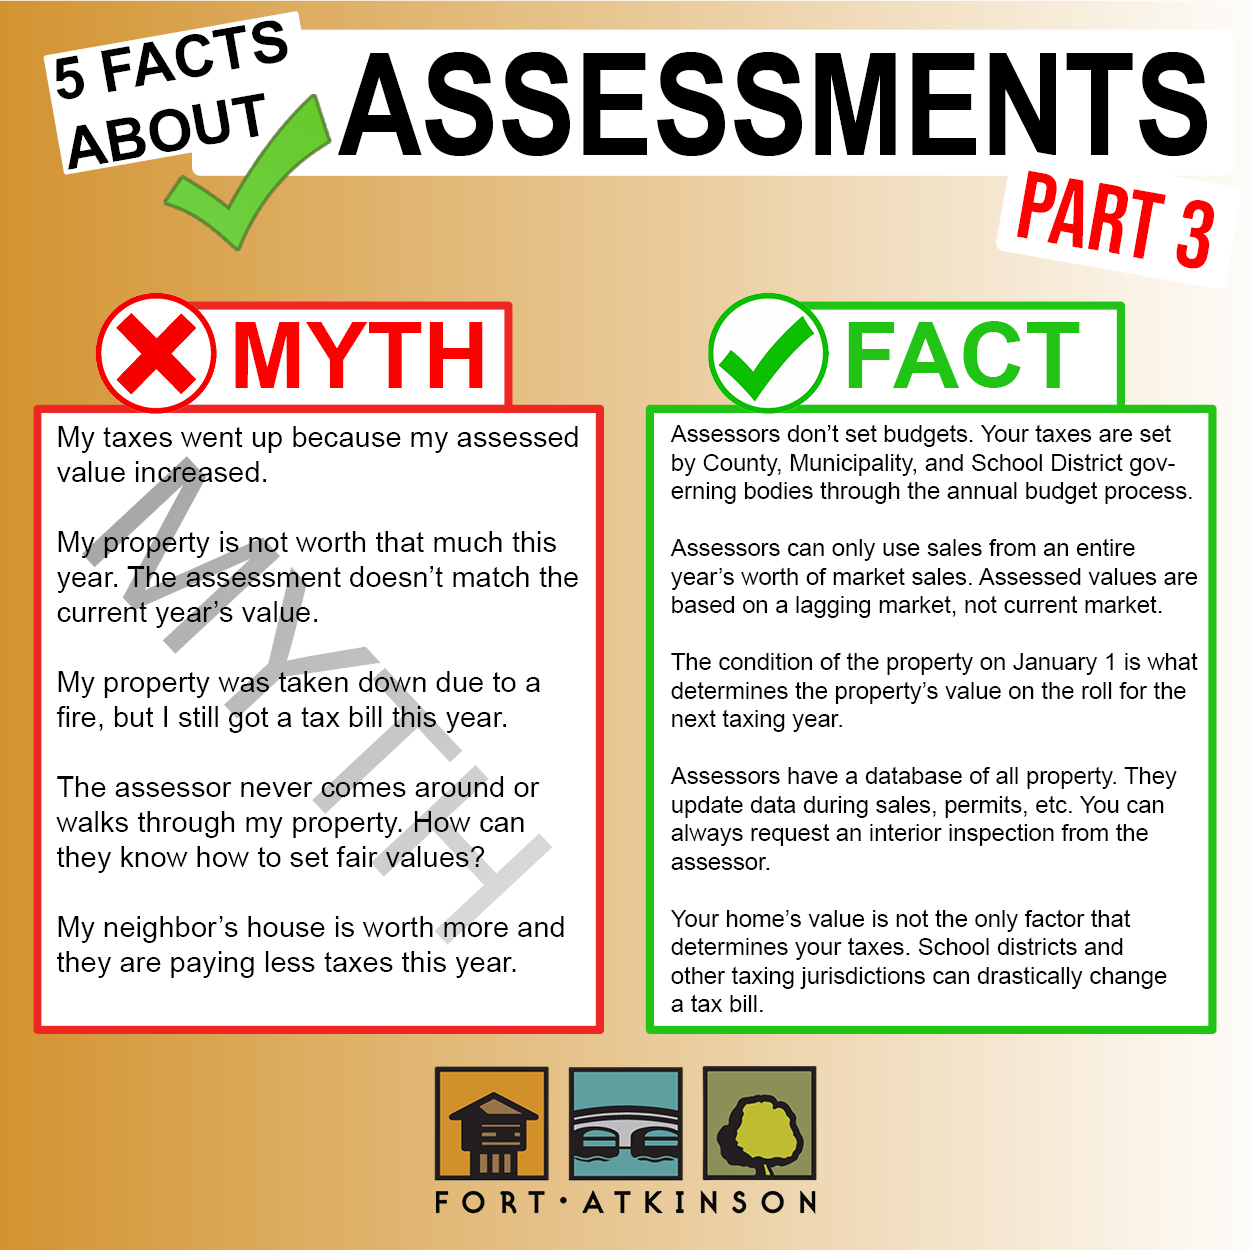 5 Facts about assessments part 3